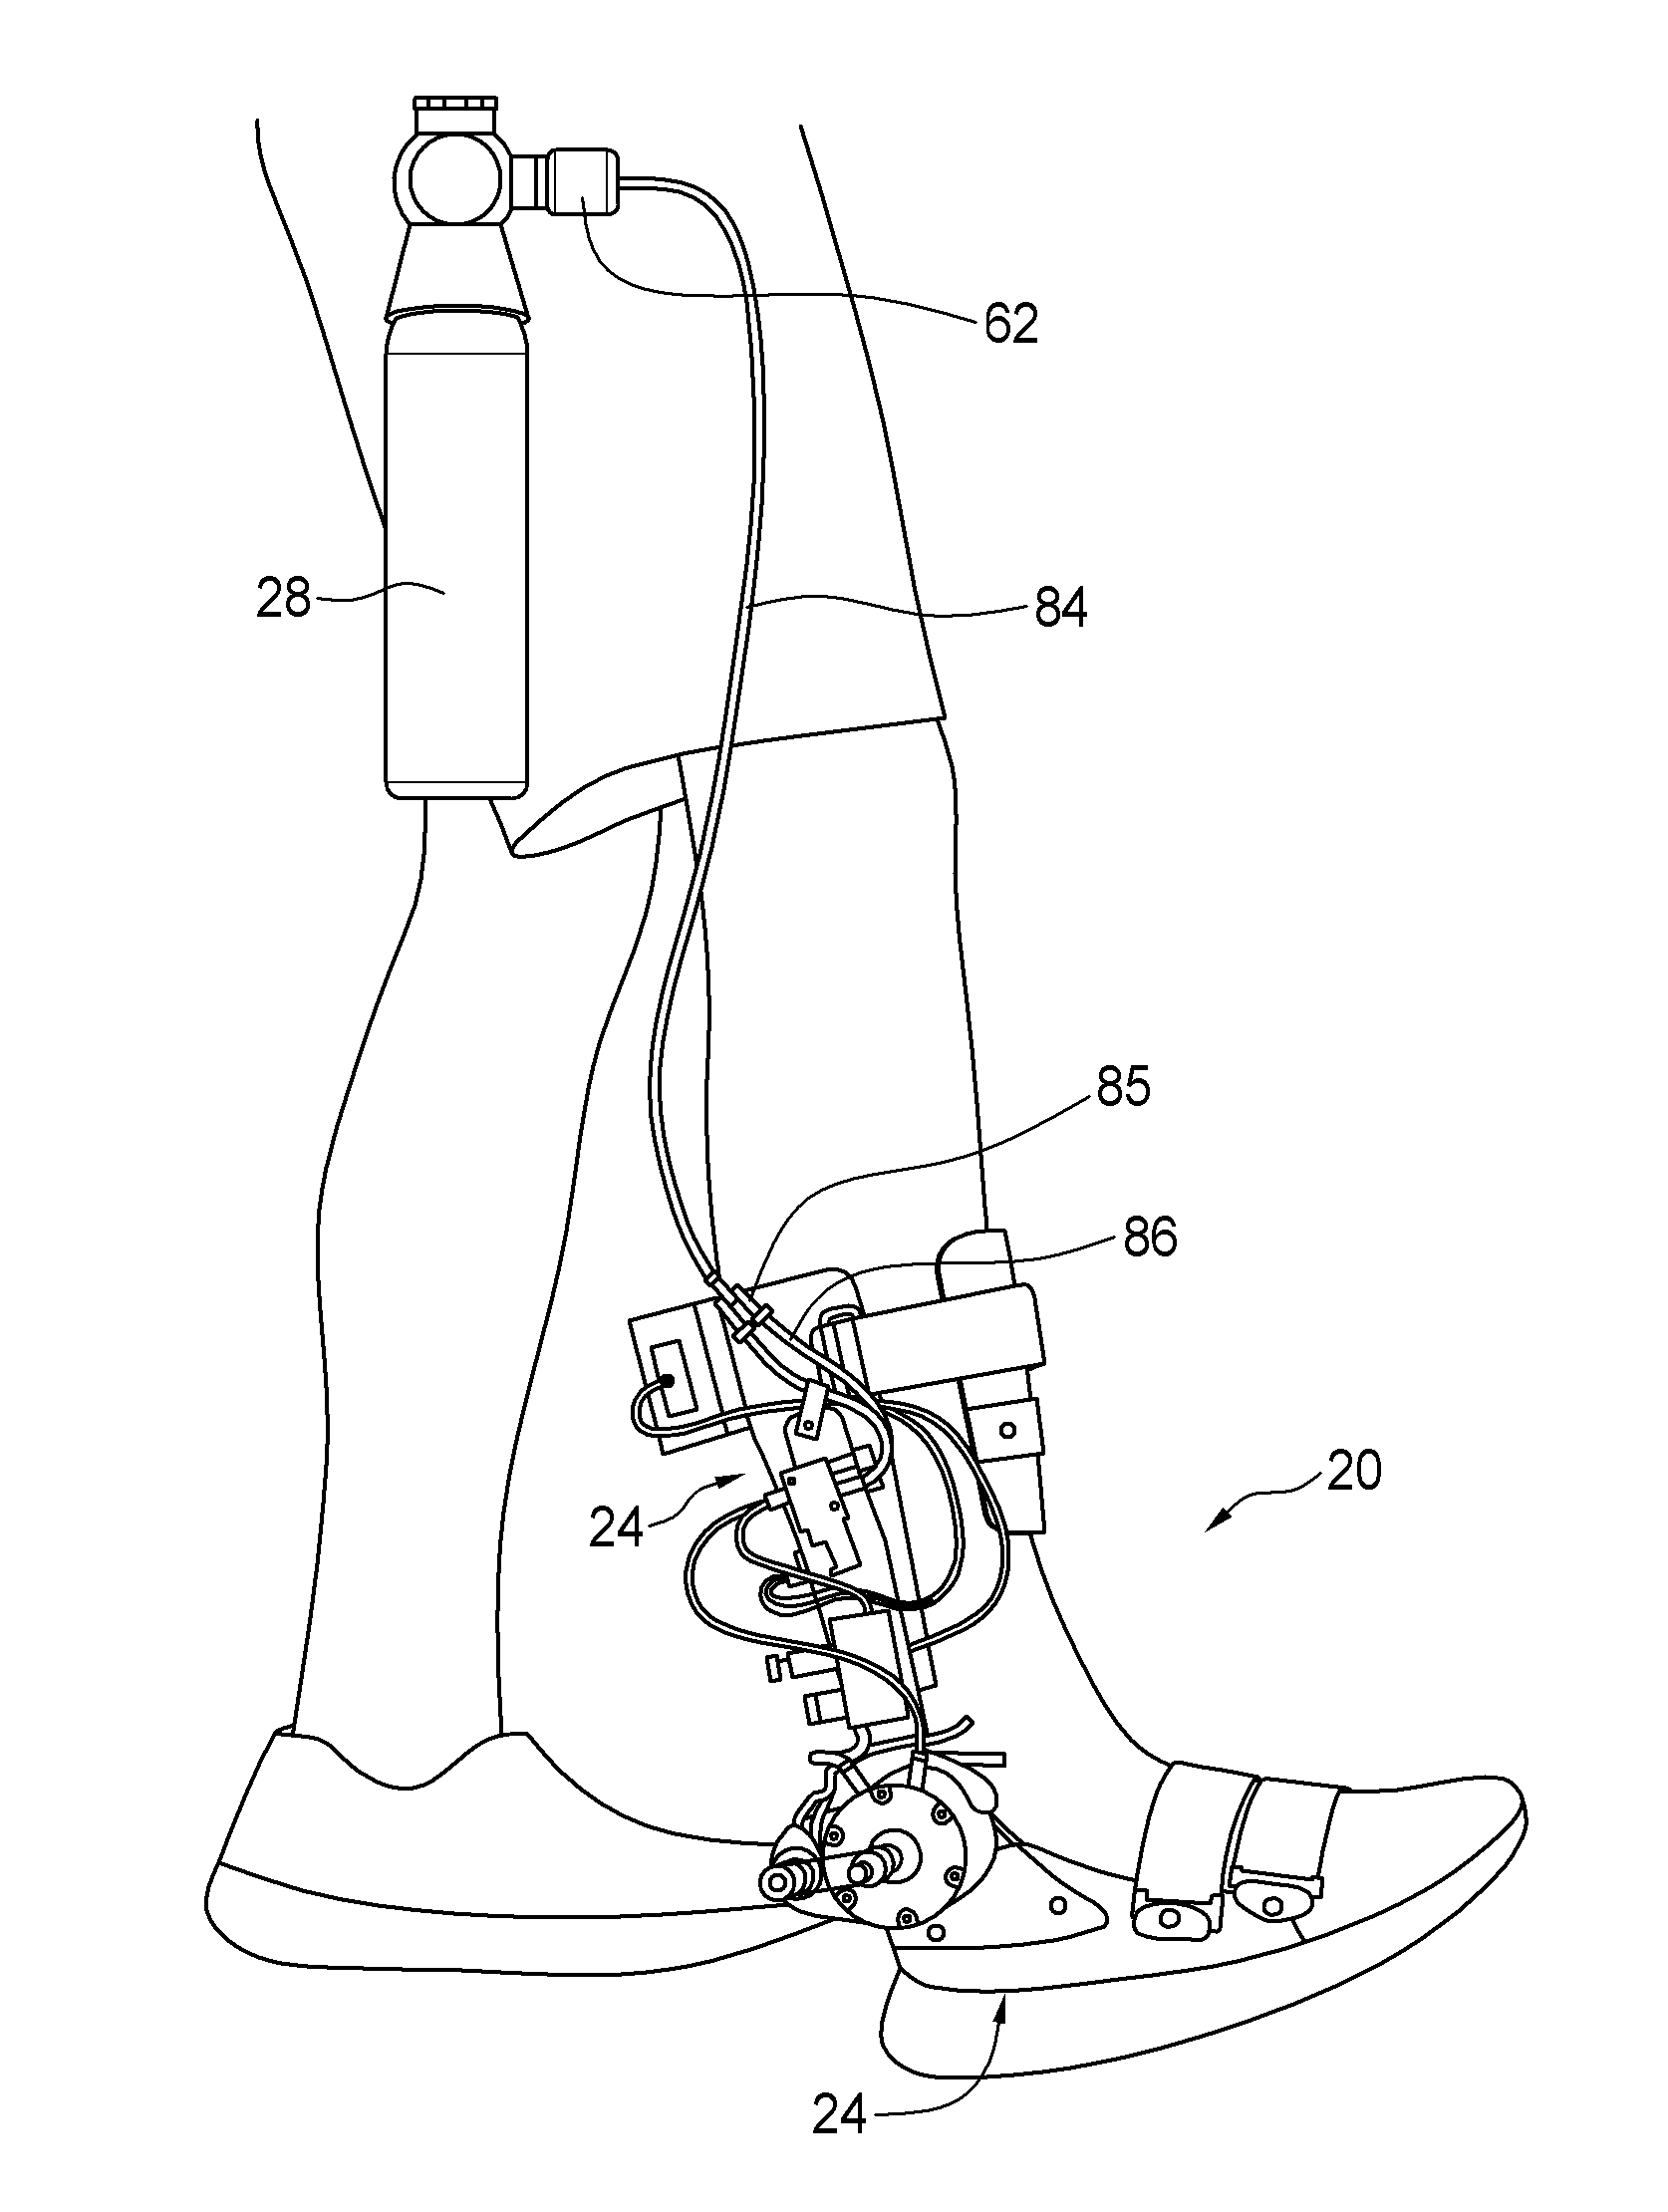 Portable active fluid powered ankle-foot orthosis